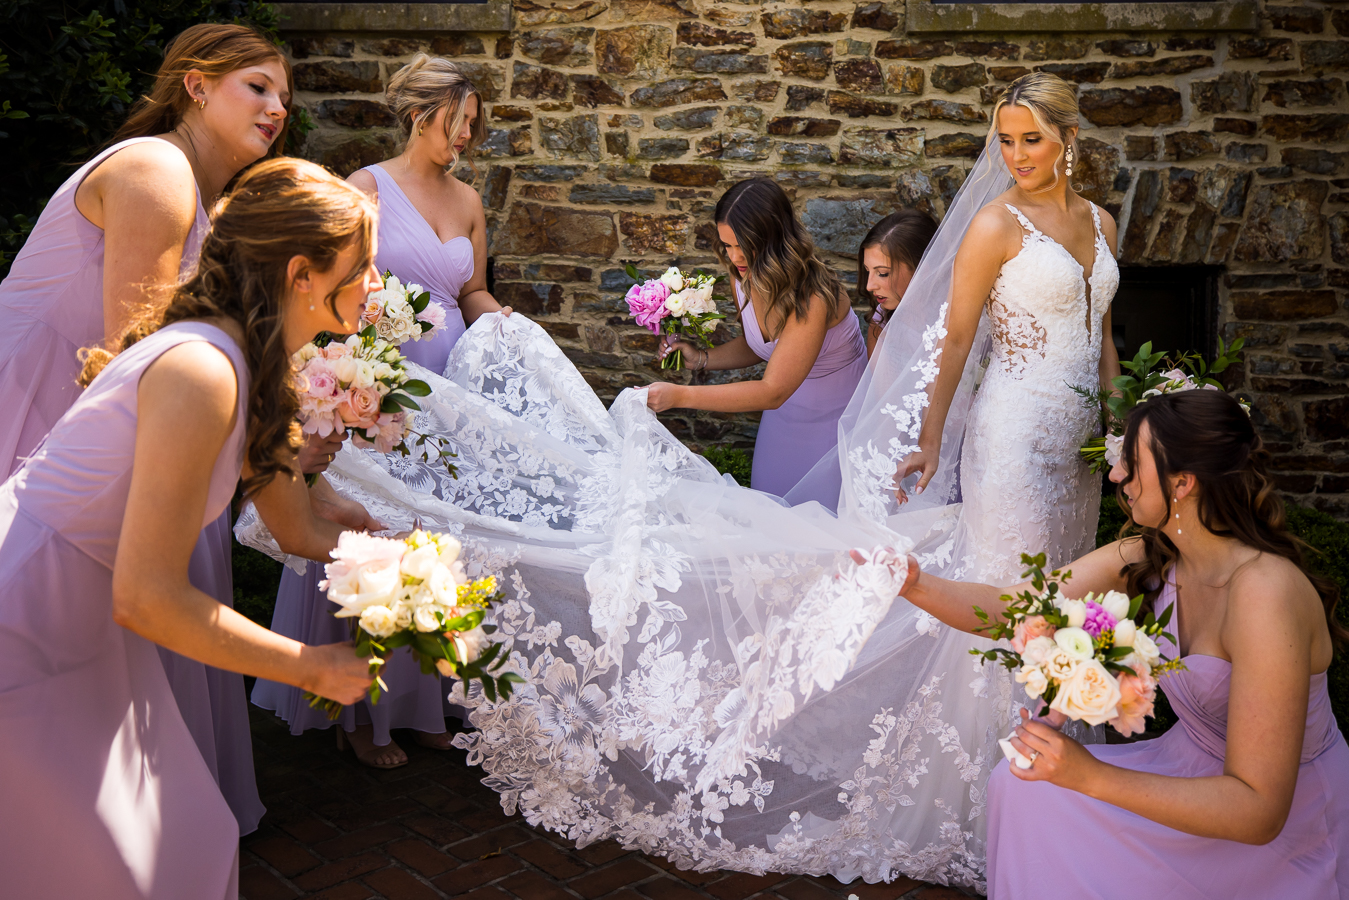 wedding photographer, lisa rhinehart, captures this image of the bridesmaids helping lay out the brides dress before their bridal party photos